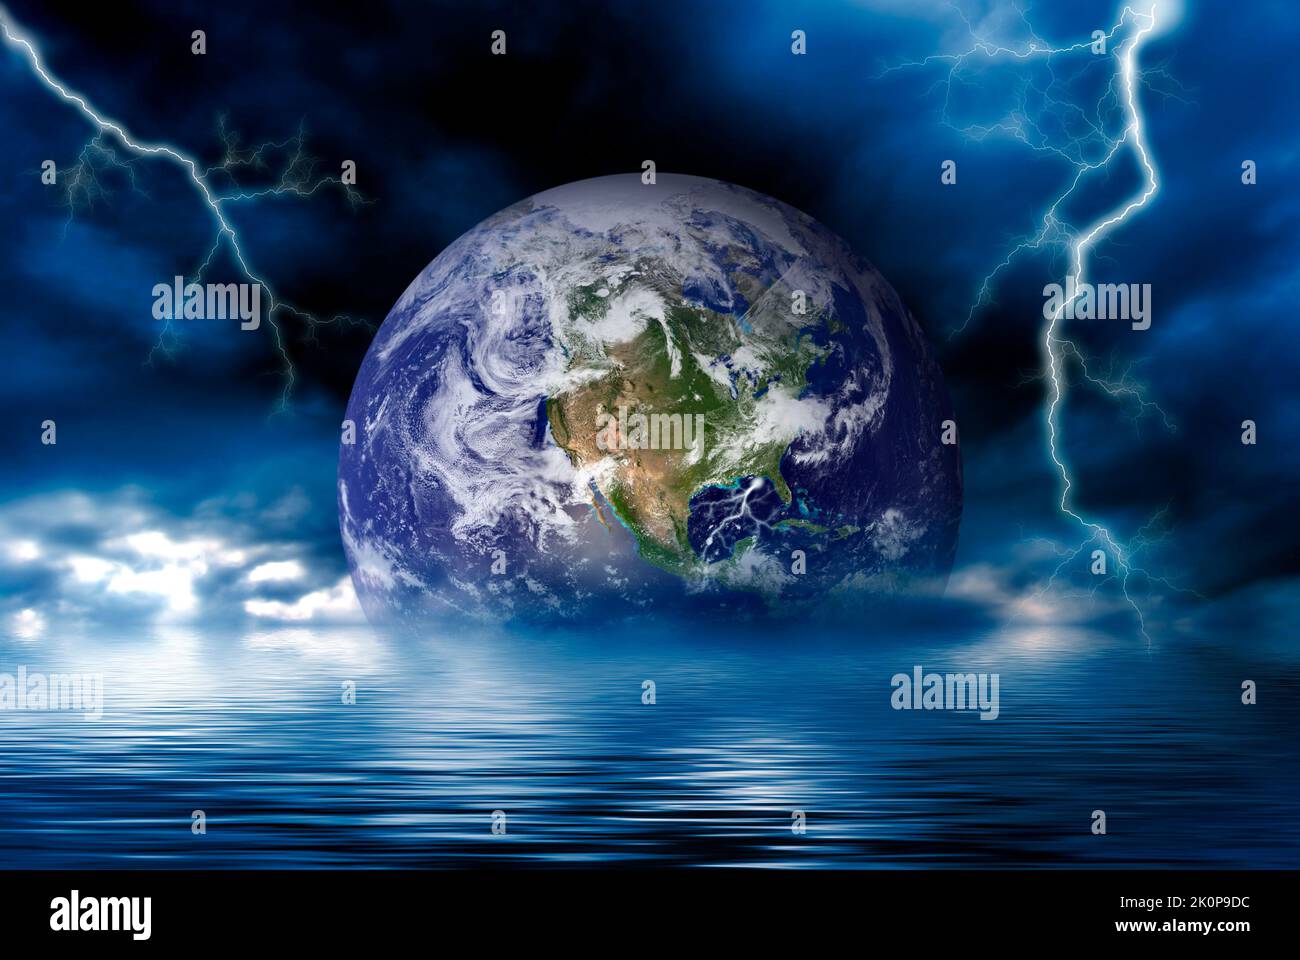 planet Earth and dramatic weather conditions, concept for global warming Stock Photo